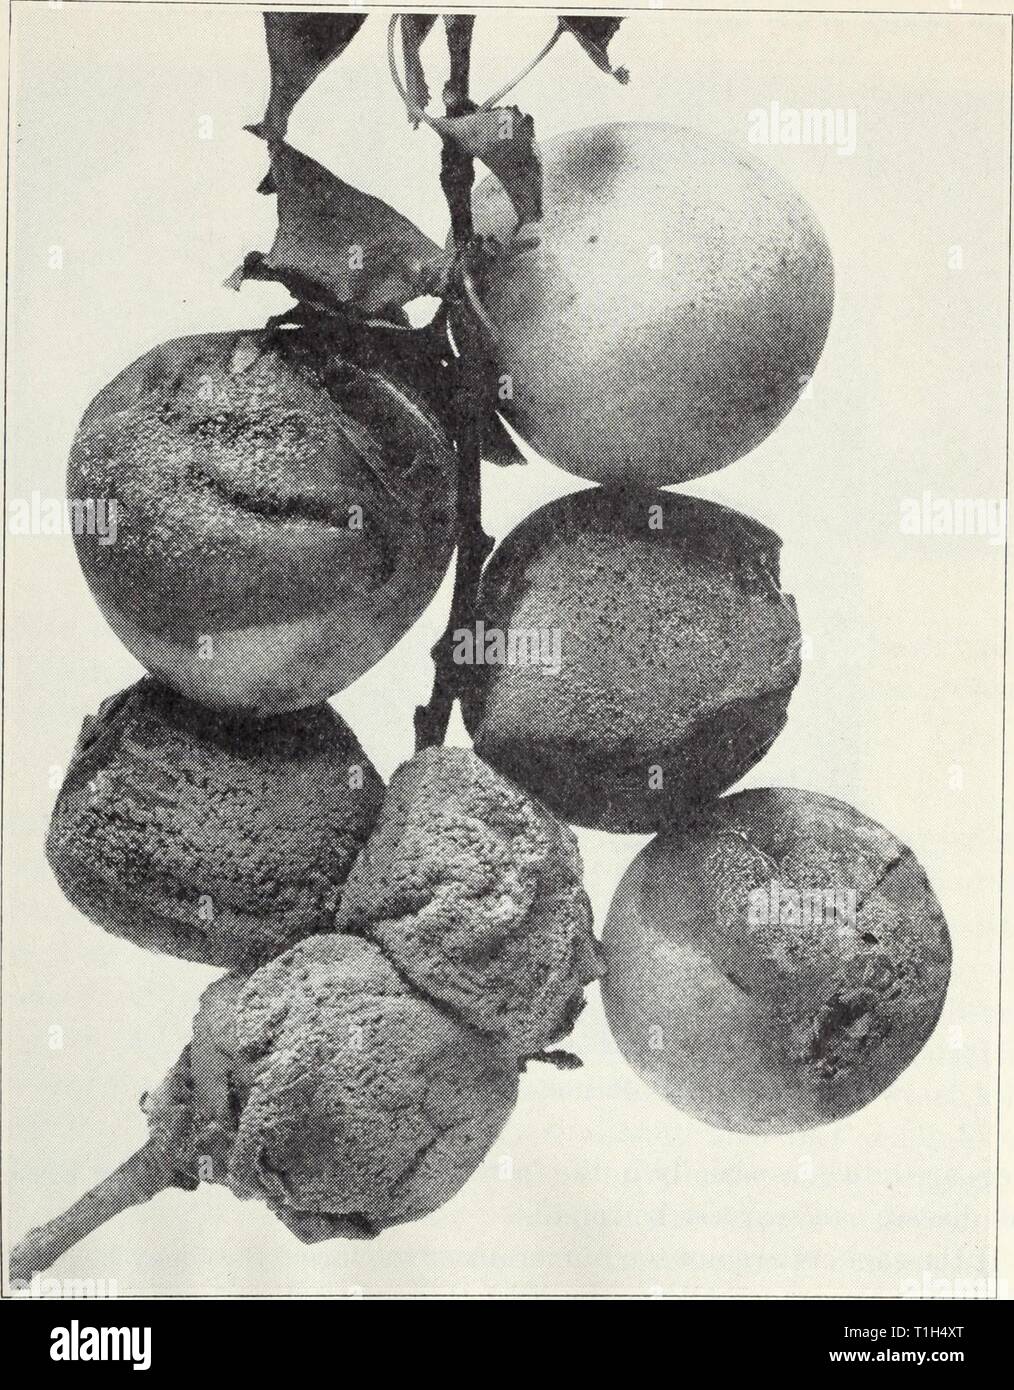 Diseases of fruits and nuts Diseases of fruits and nuts  diseasesoffruits120smit Year: 1941  0 California Agricultural Extension Service [Cir. 120 bodies of the trees covered with a spray of bordeaux mixture at all times might be advisable with young apricot trees in places where bacterial gummosis is very troublesome. Blackheart, Wilt, Verticilliosis.—In this disease of young apricot    Fig. 14.—Brown rot of apricot fruit. trees, some of the shoots and branches die suddenly in summer, the leaves remaining attached, and the wood is darkened far back into the tree. The disease is caused by a so Stock Photo